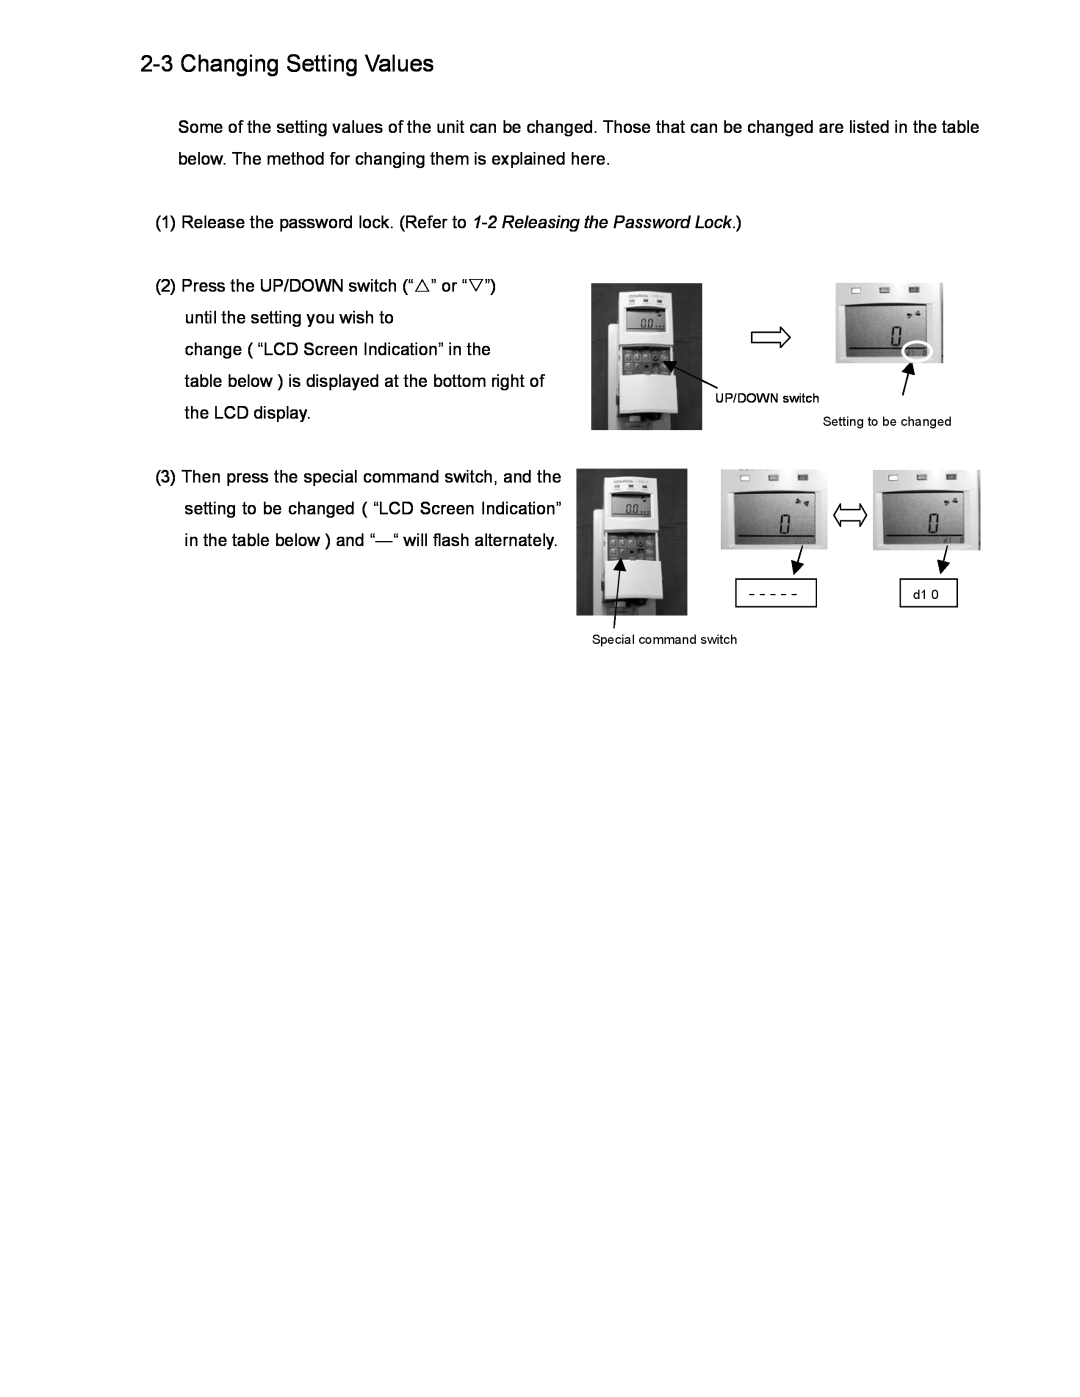 DOD PS-7 operation manual 2-3Changing Setting Values 